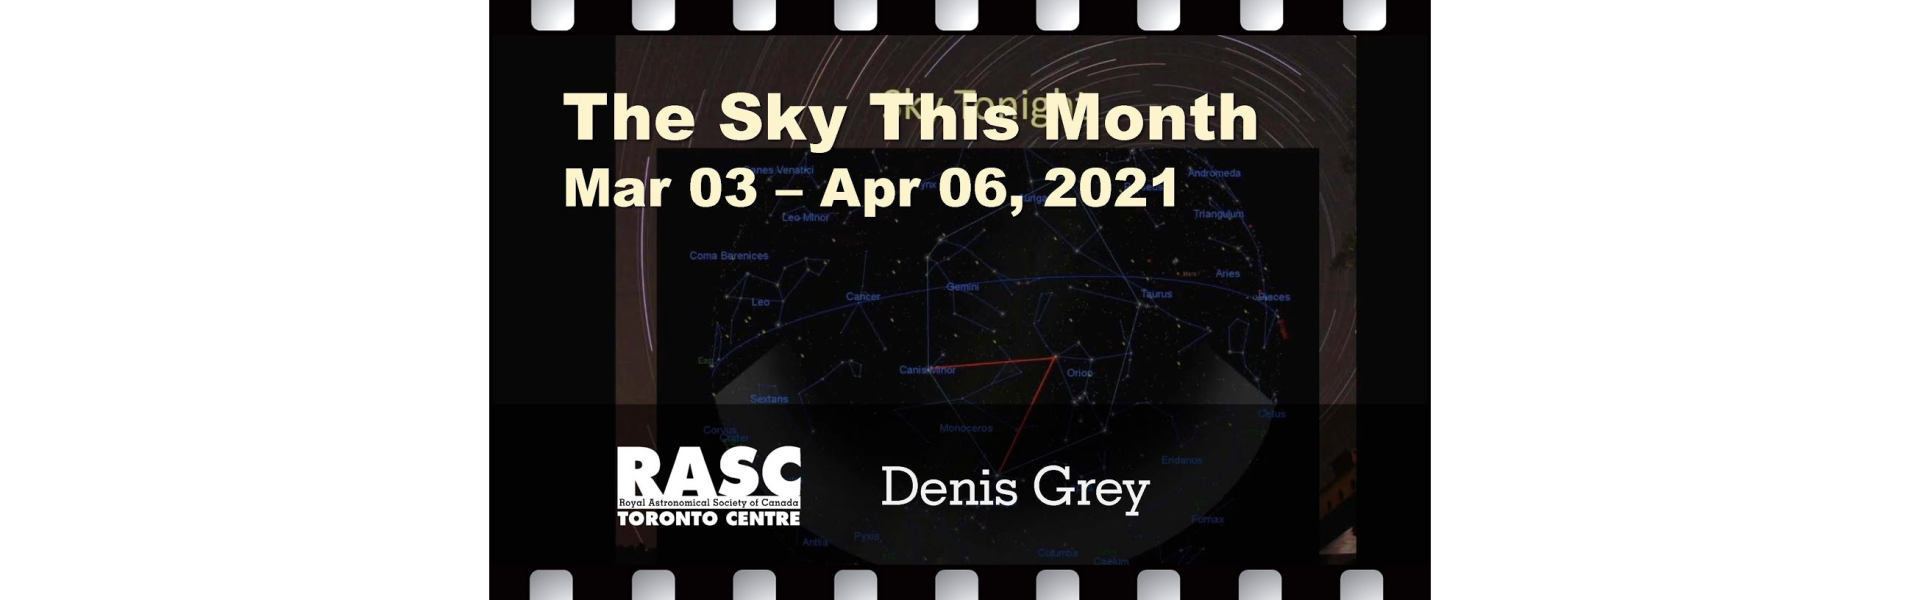 The Sky This Month Mar 03 - Apr 06, 2021